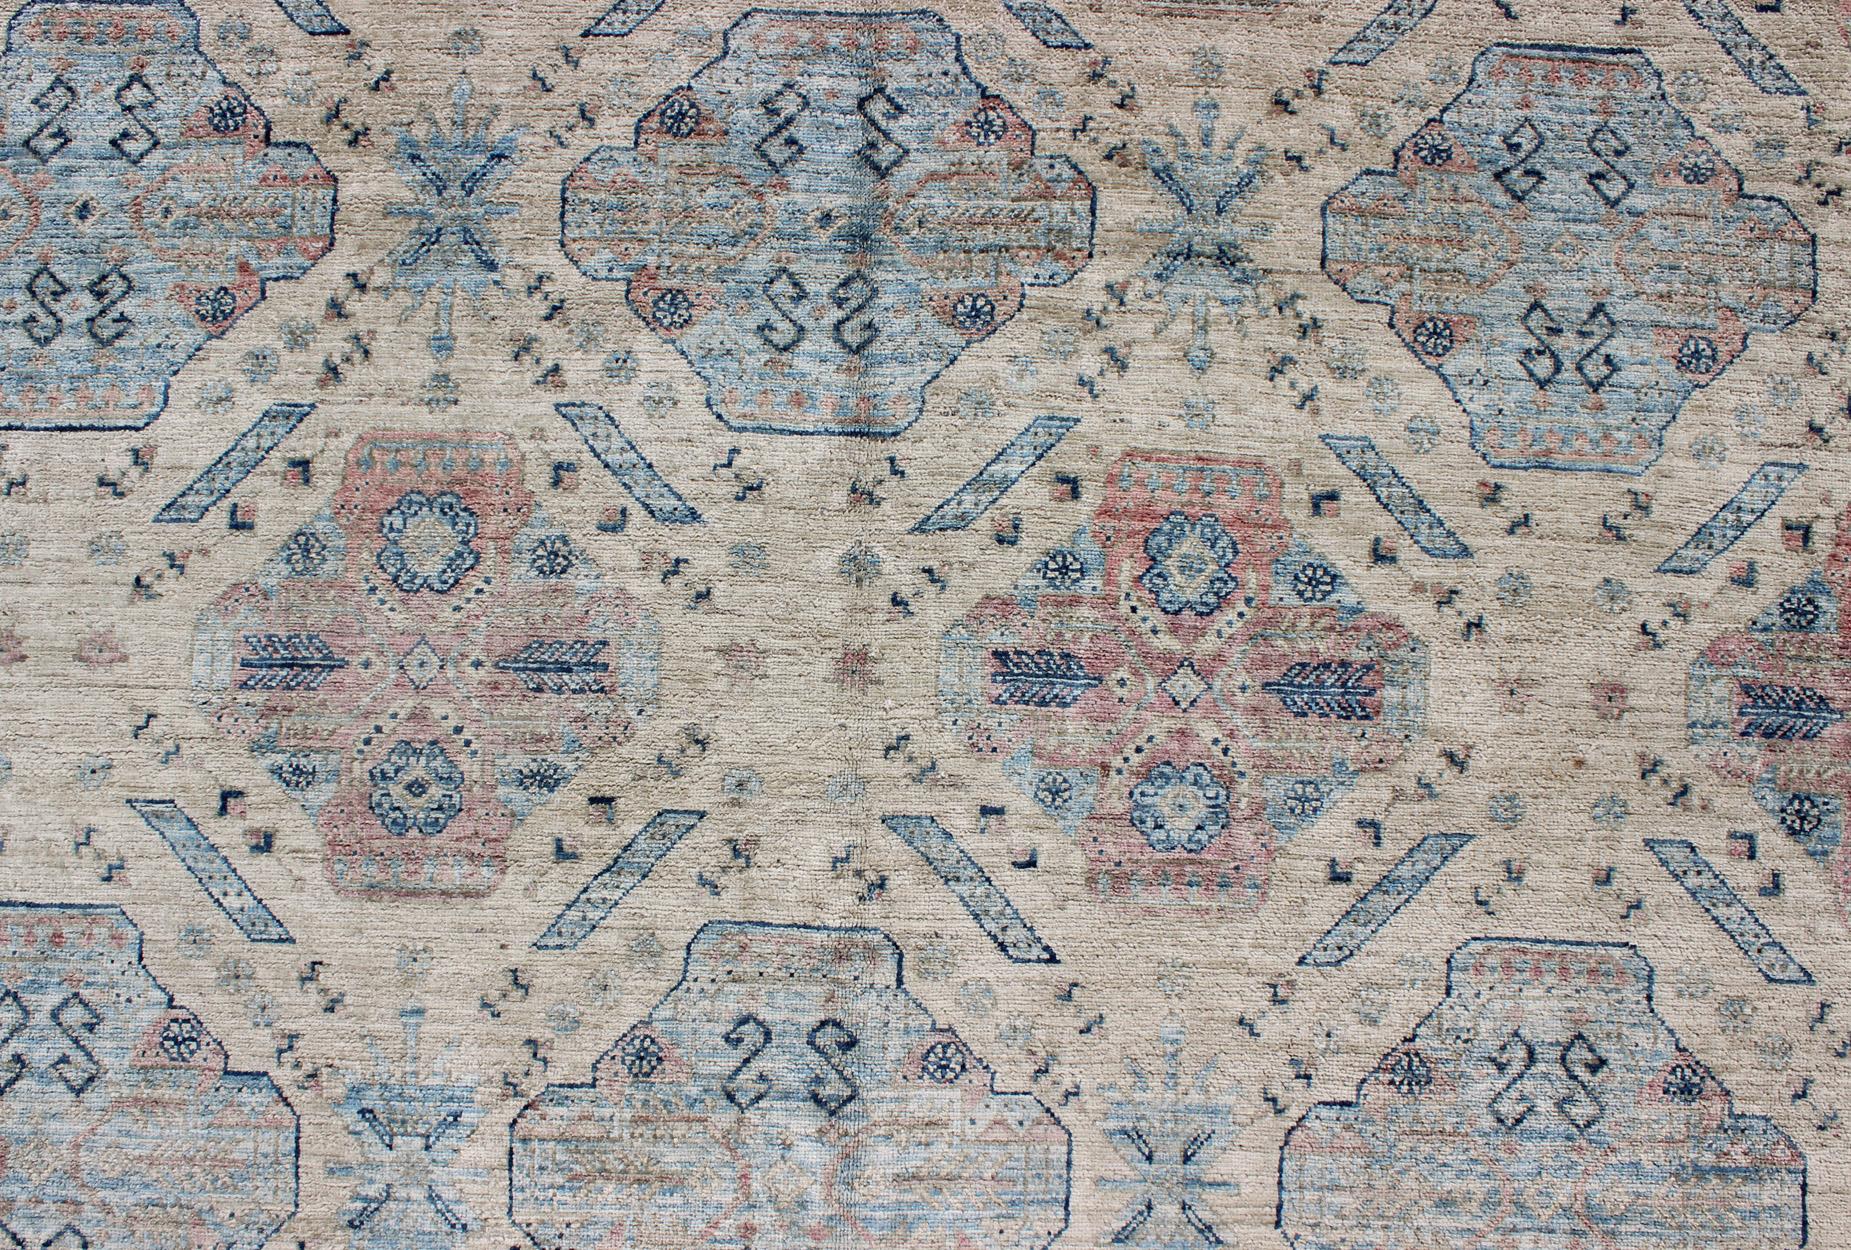 Measures: 9 x 11'8        
Khotan Design Rug With All-Over Geometric Pattern by Keivan Woven Arts. rug KOL-67784 country of origin / type: Afghanistan / Khotan

This Khotan features a geometric all-over design flanked by a repeating pattern in the